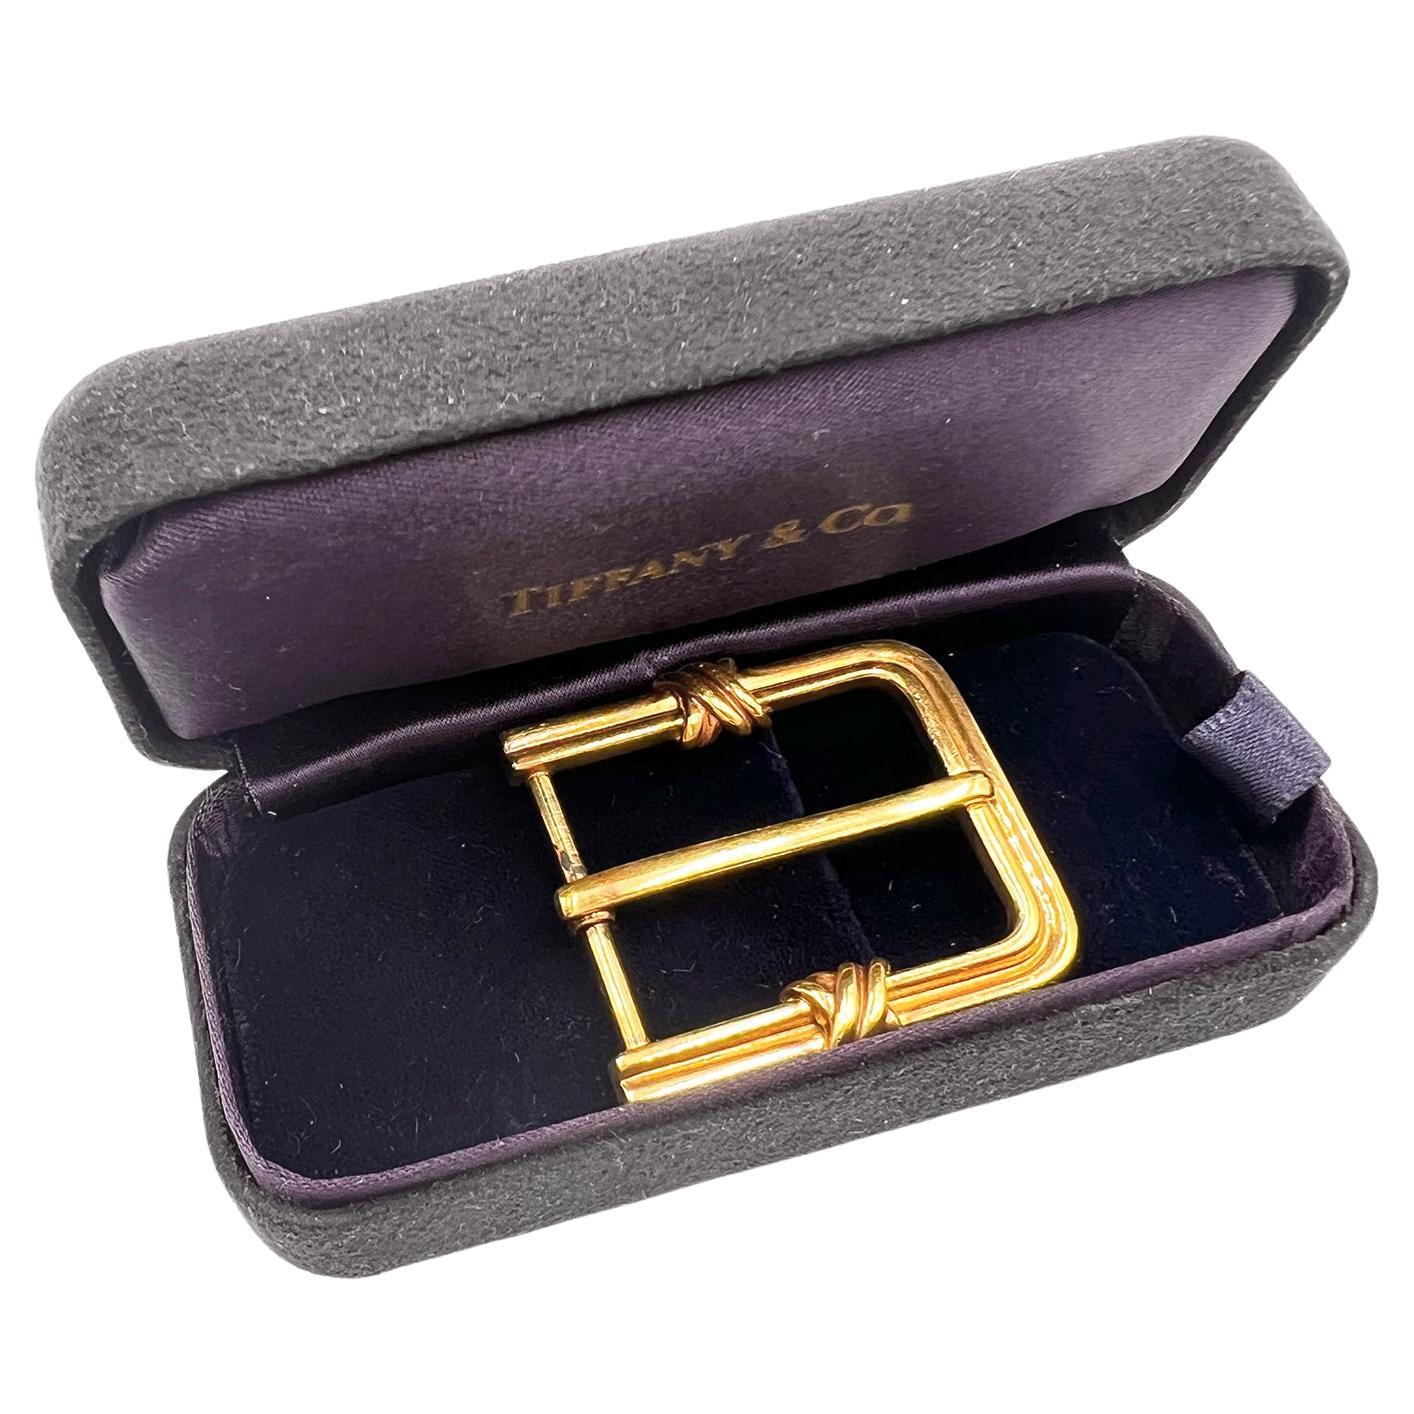 Step into a world of timeless elegance with this 18 karat yellow gold Tiffany & Co. belt buckle, circa 1992. This stunning piece is a true testament to the craftsmanship and luxury that Tiffany & Co. is renowned for.

Featuring an open rectangular